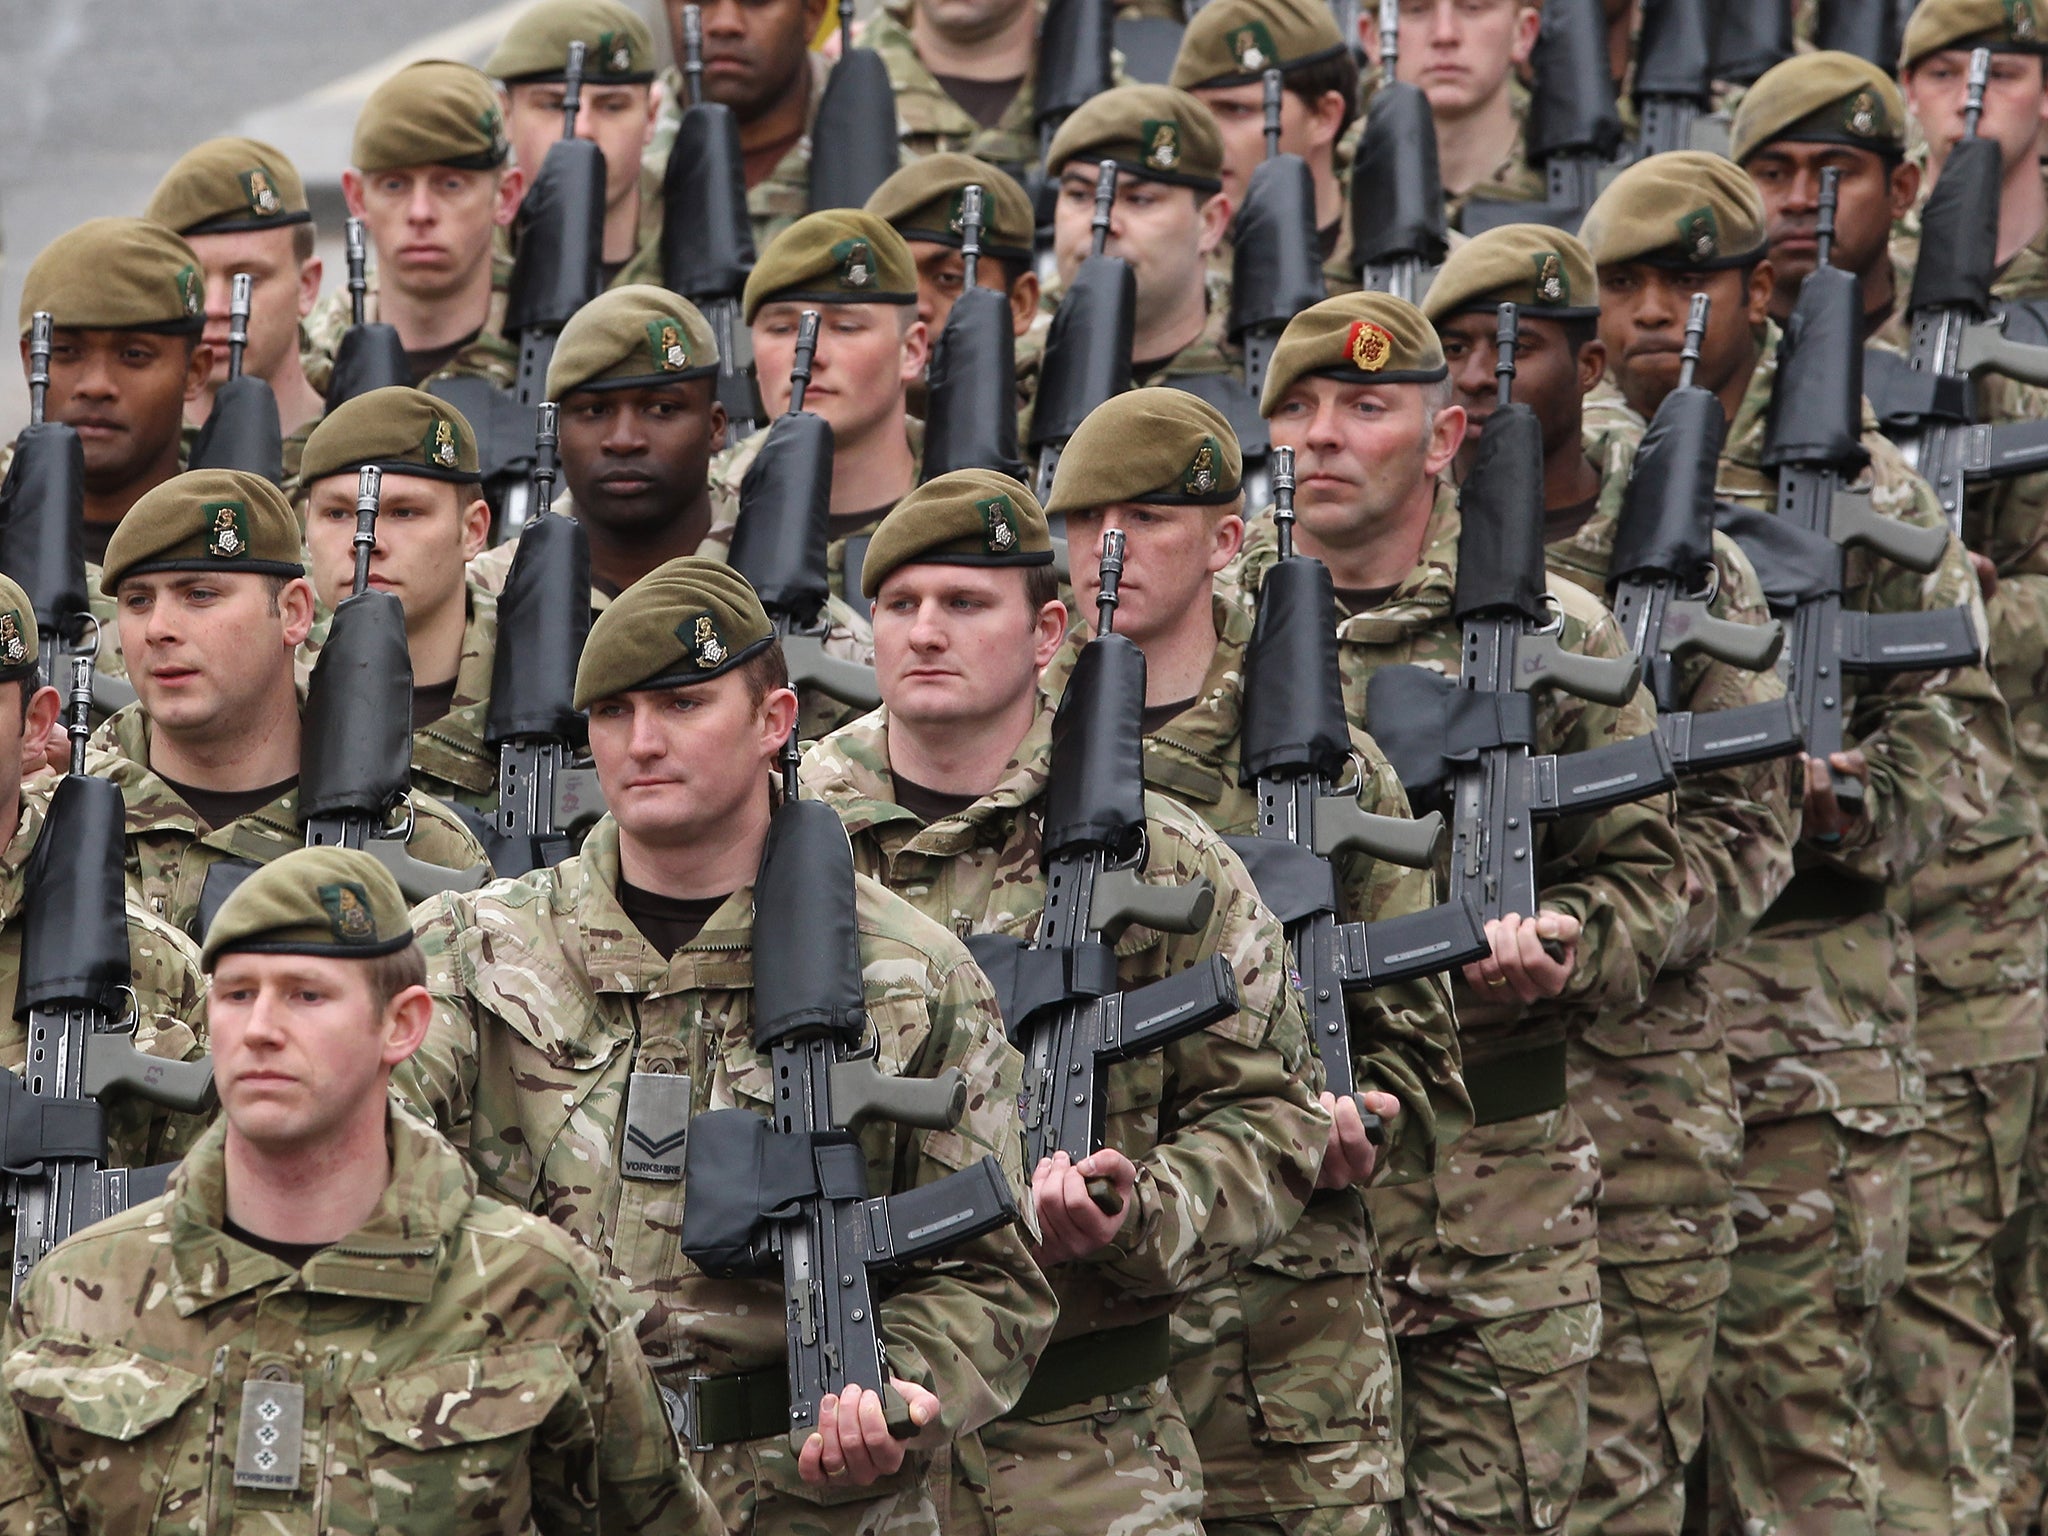 More than 500 service personnel were given Lariam before being deployed to Afghanistan